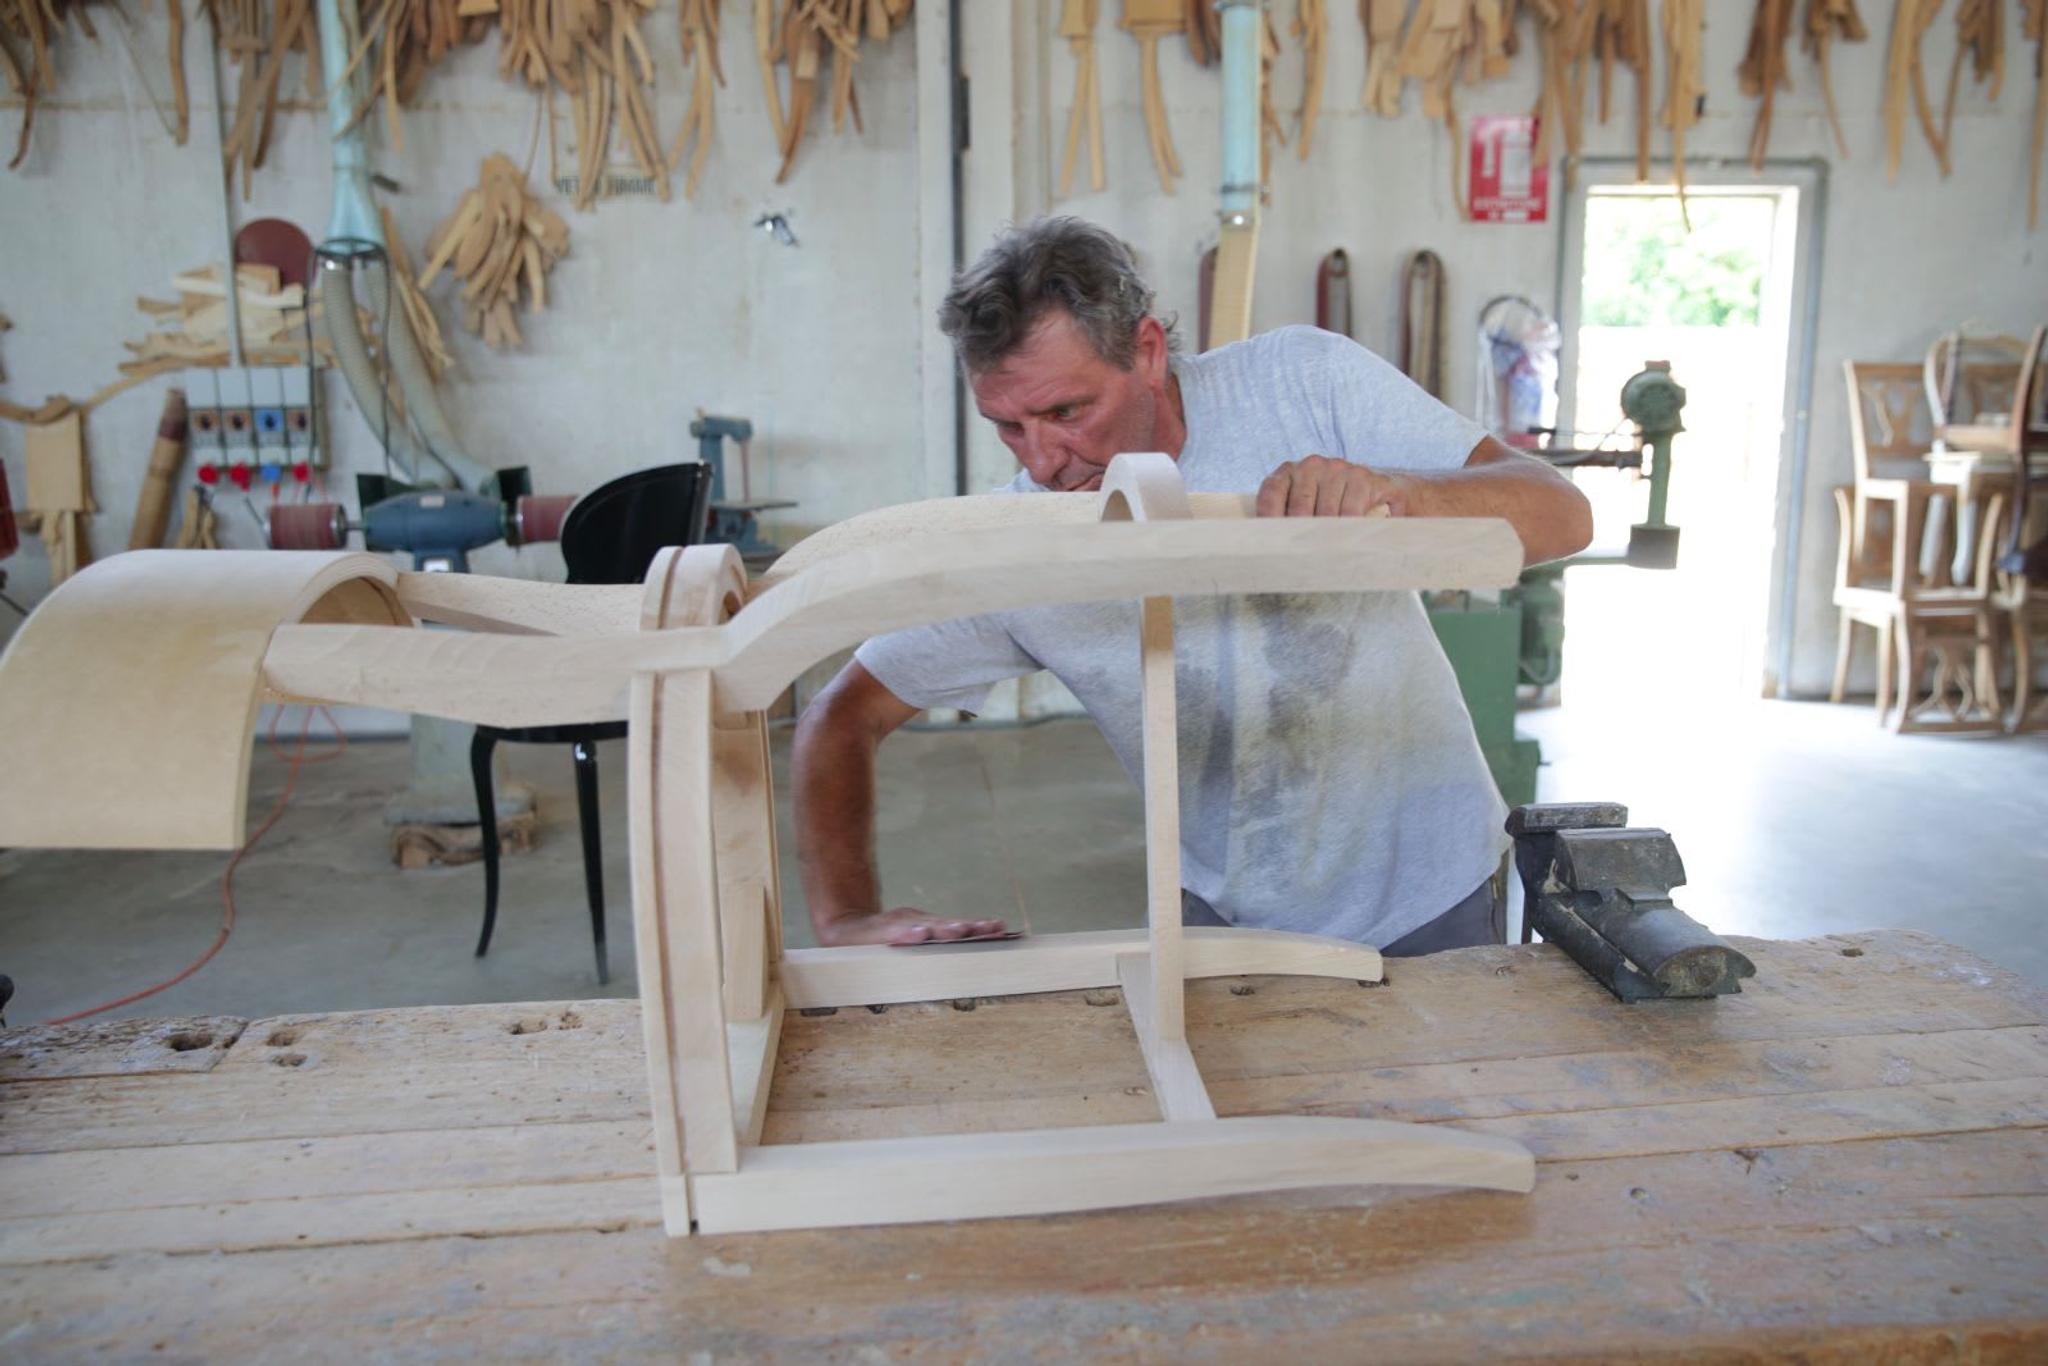 An artisan at work on a chair